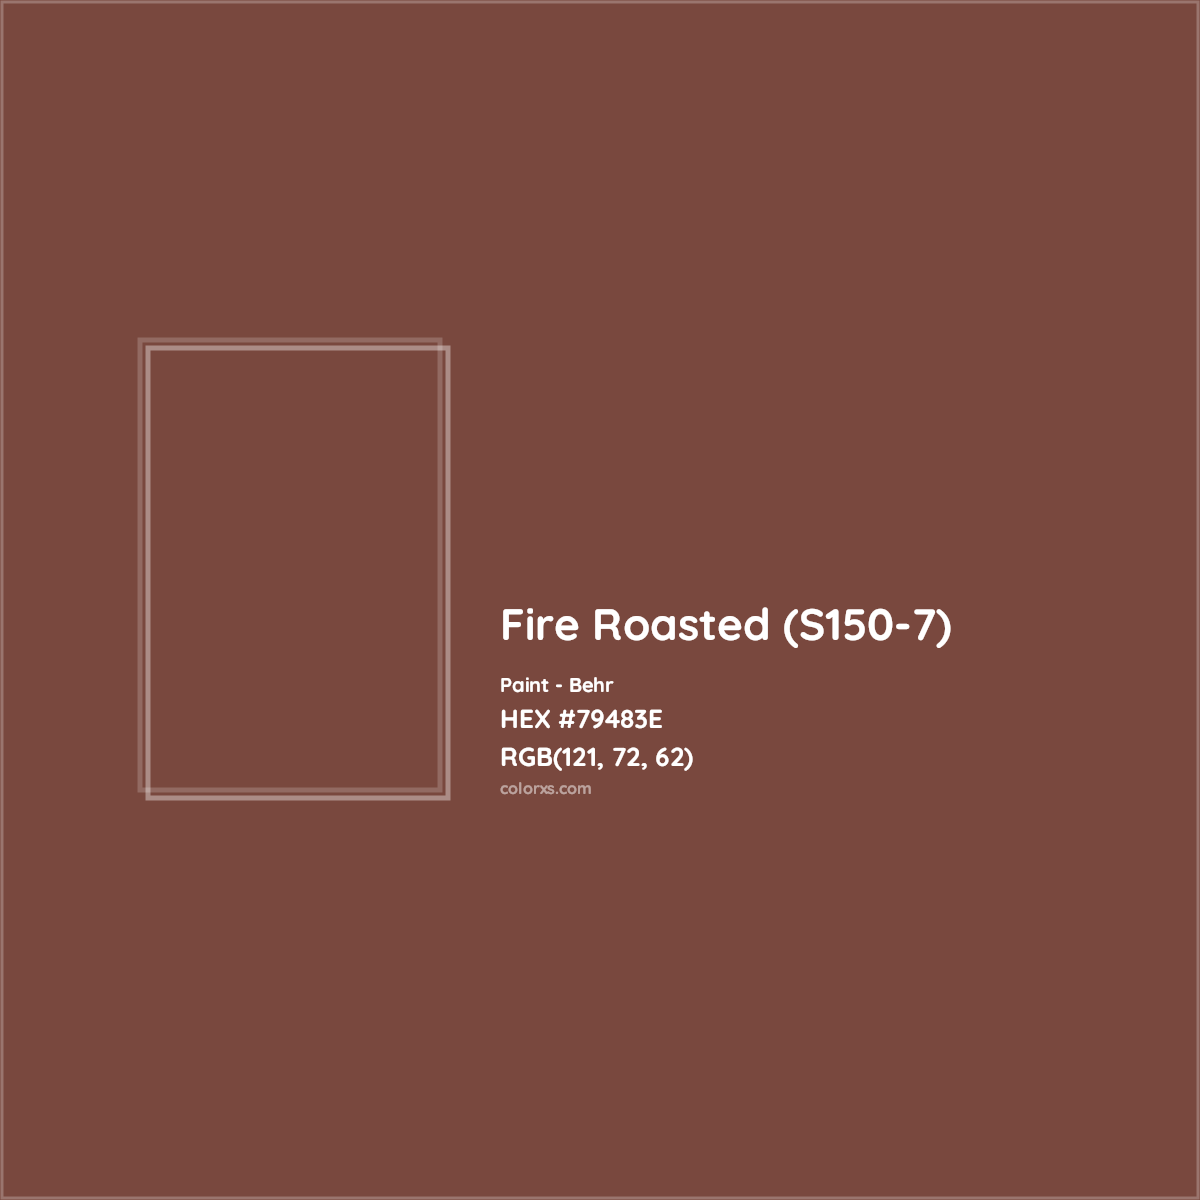 HEX #79483E Fire Roasted (S150-7) Paint Behr - Color Code